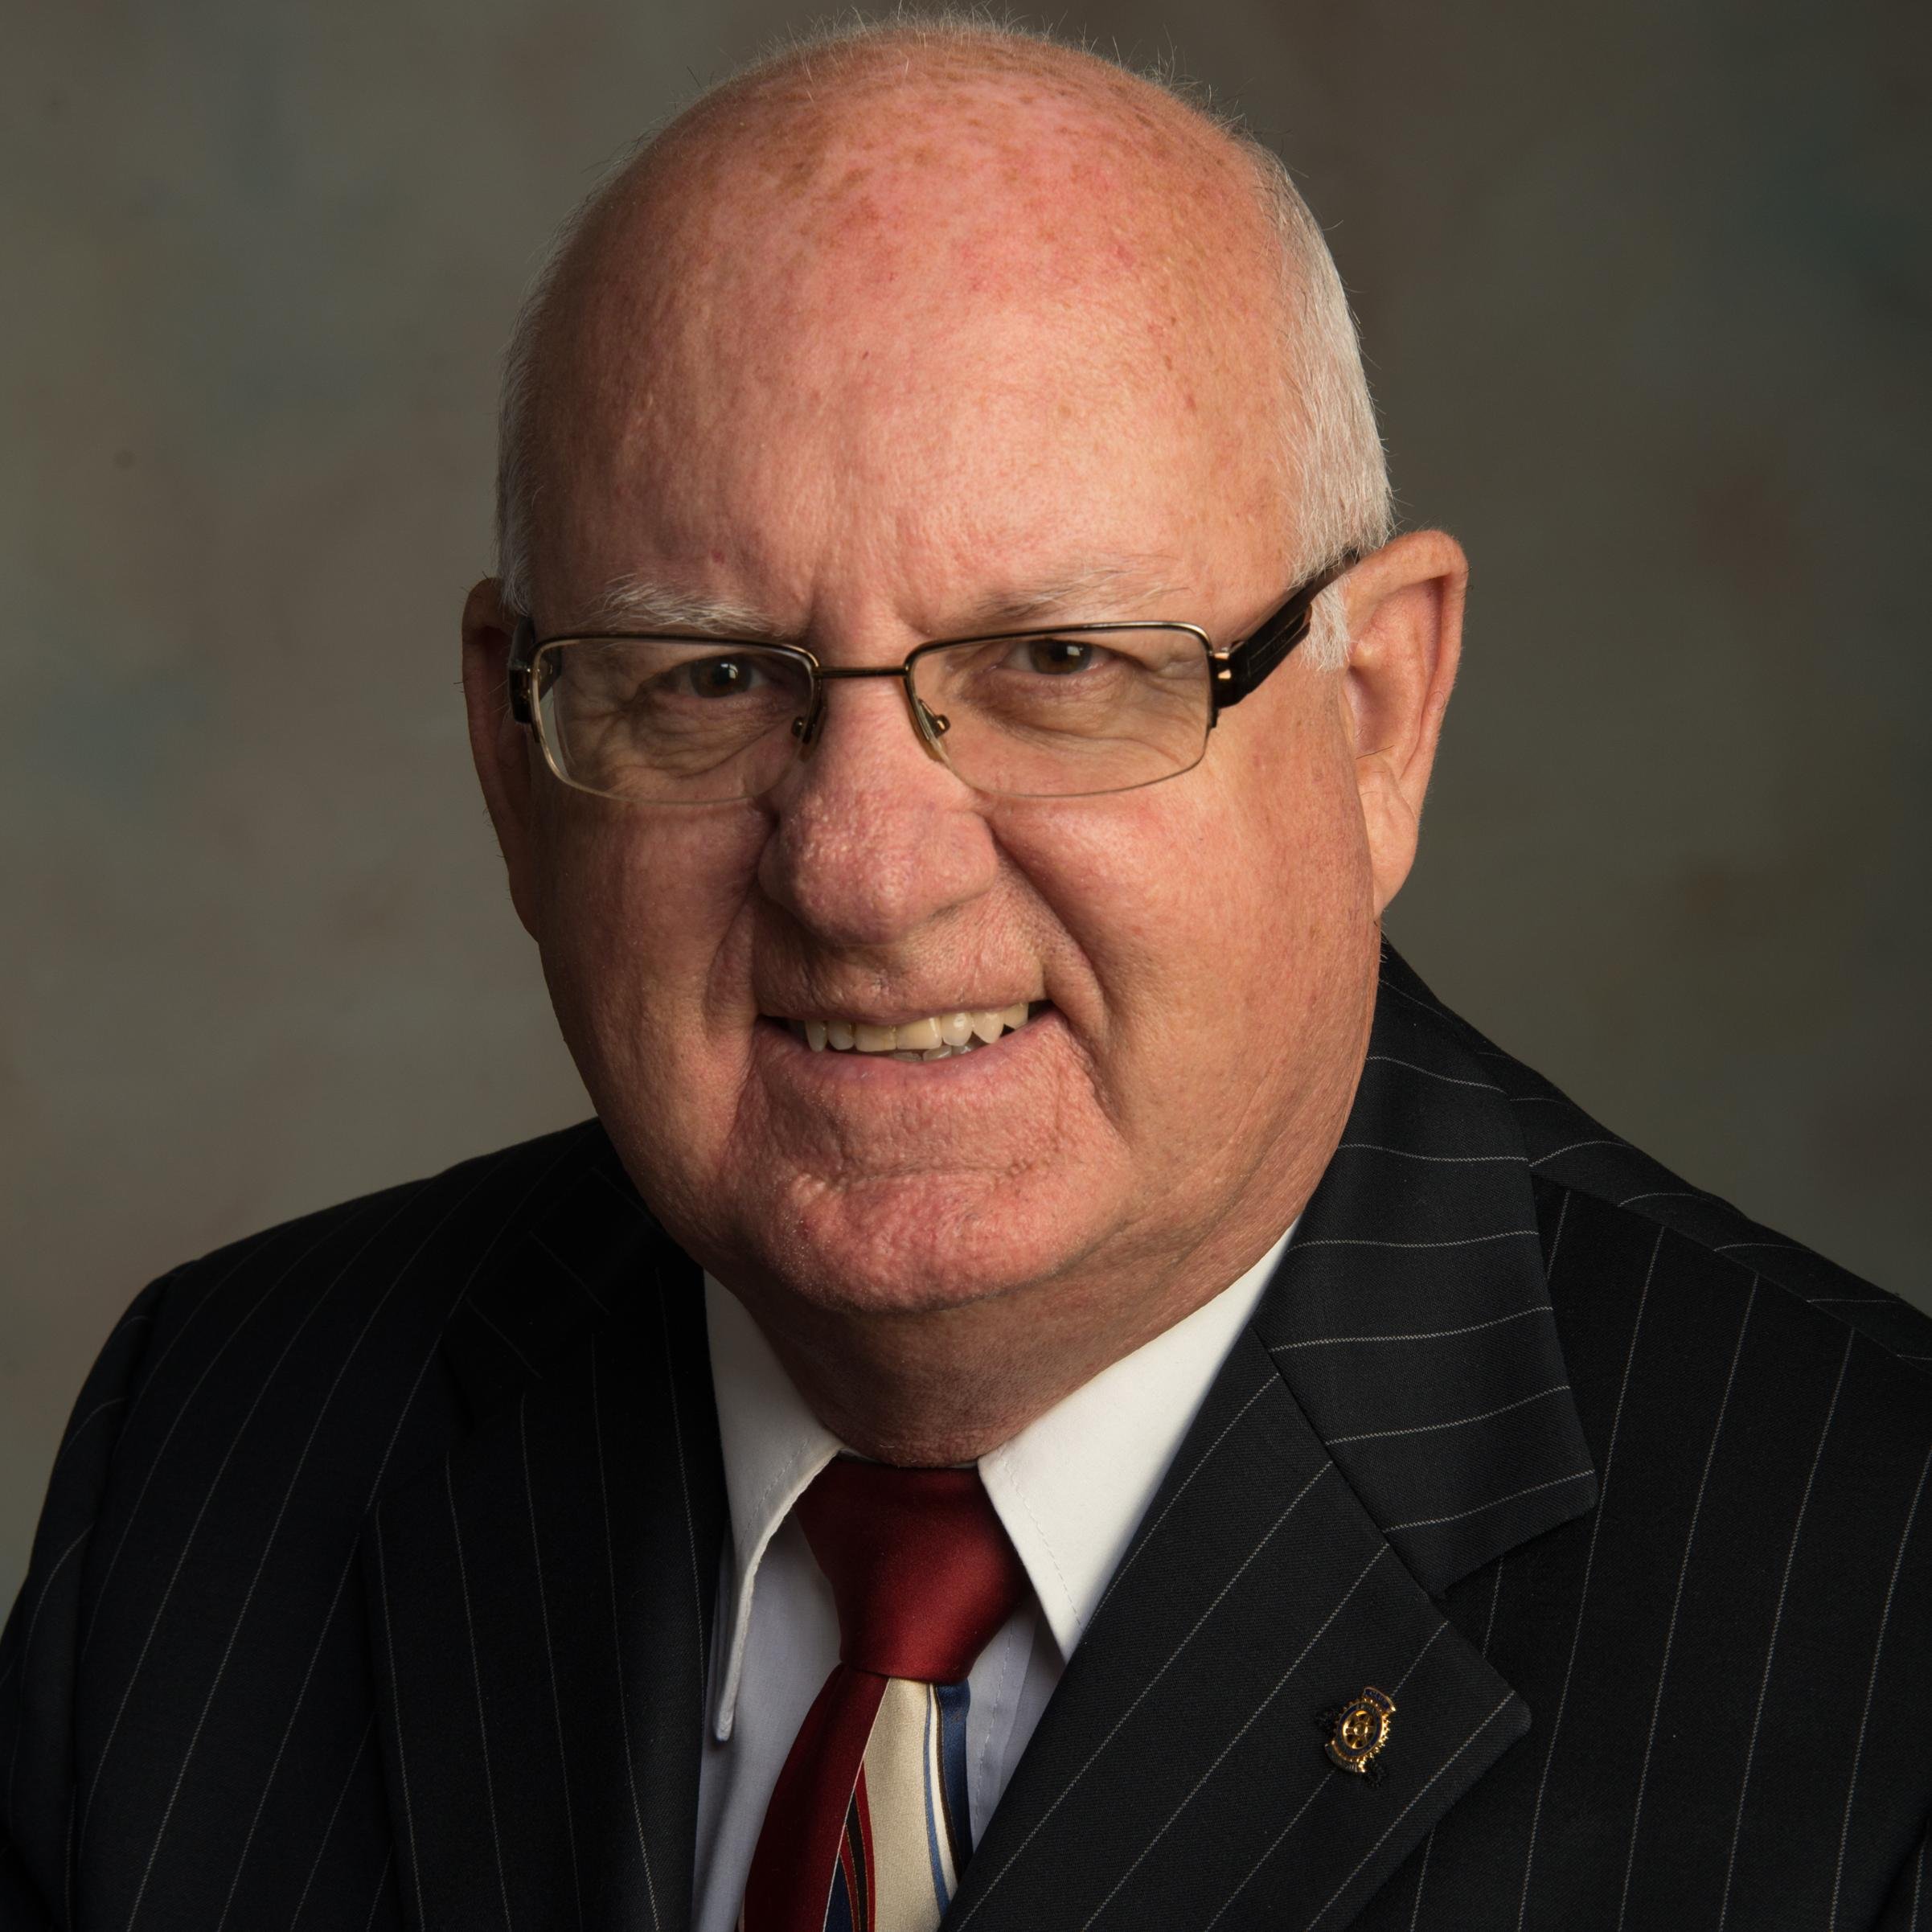 Wayne Fertich is dedicated and experienced representative of the community of Grimsby's interests.